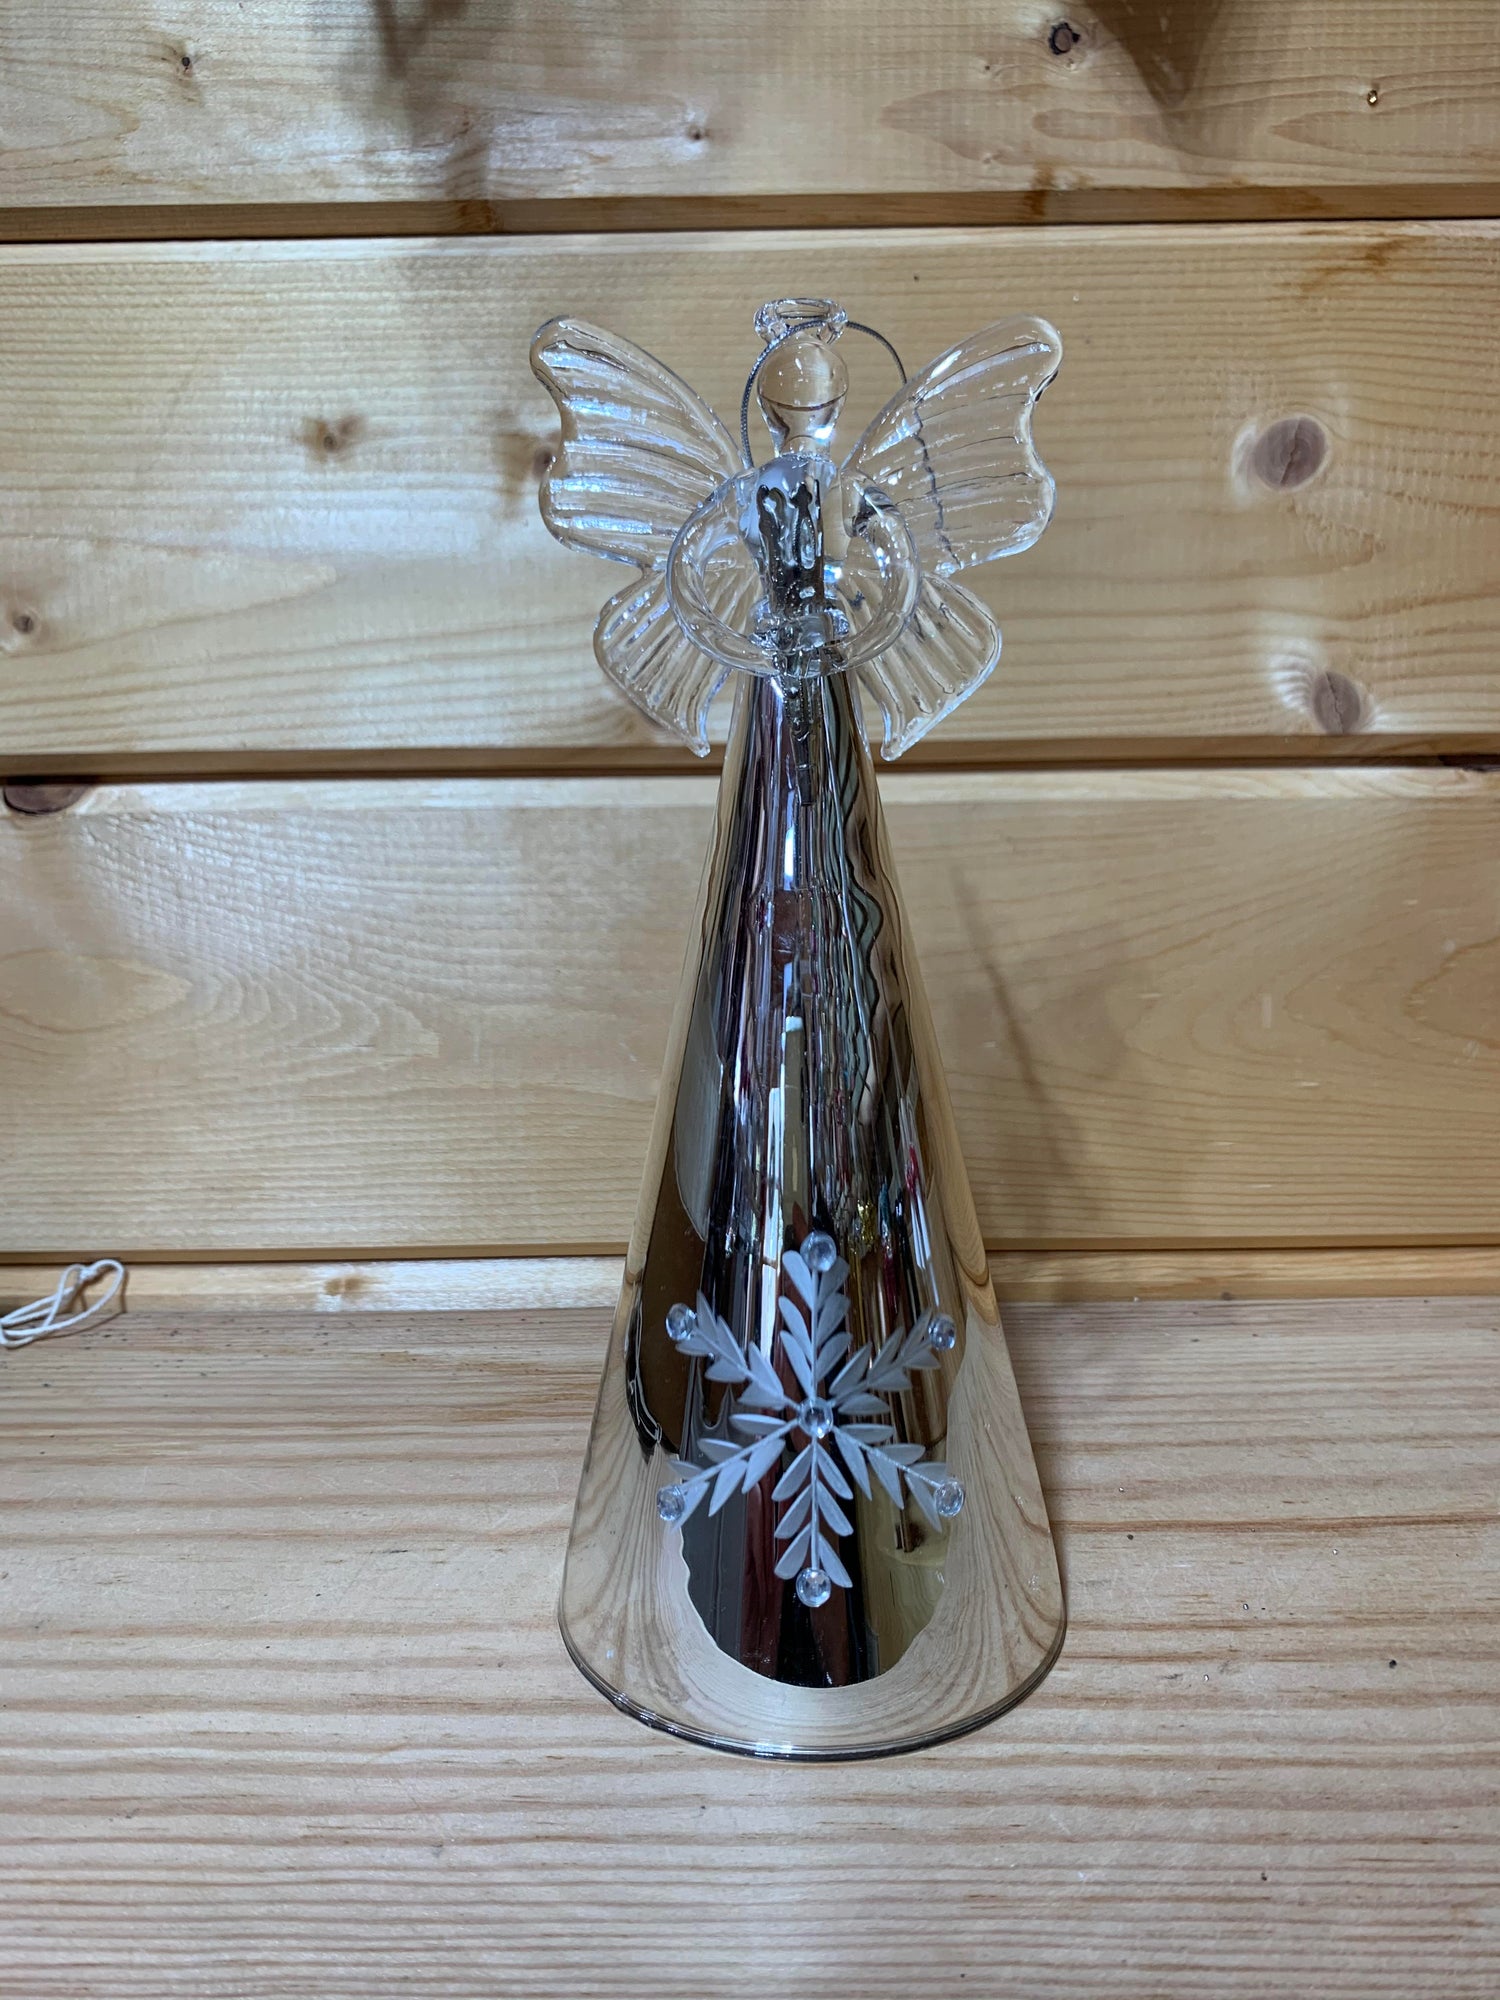 This stunning 20cm glass angel has pretty snowflake bindis on the skirt and also functions as a candle holder. It will be the perfect finishing touch to your Christmas tree!